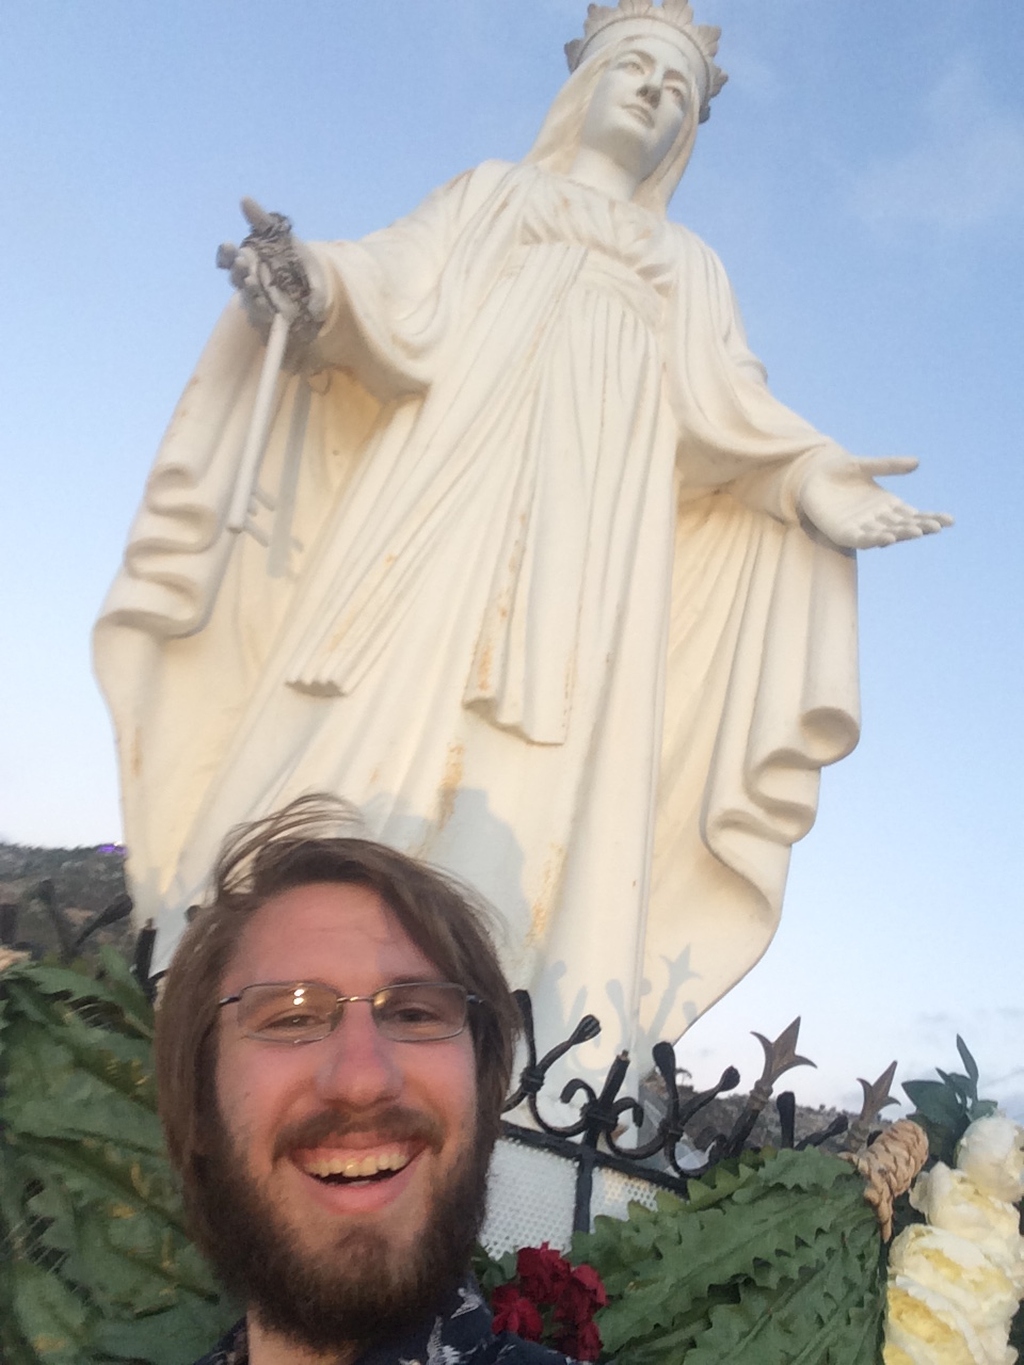 It was nigh on impossible to get this colossal statue of Mary to fit in my selfie